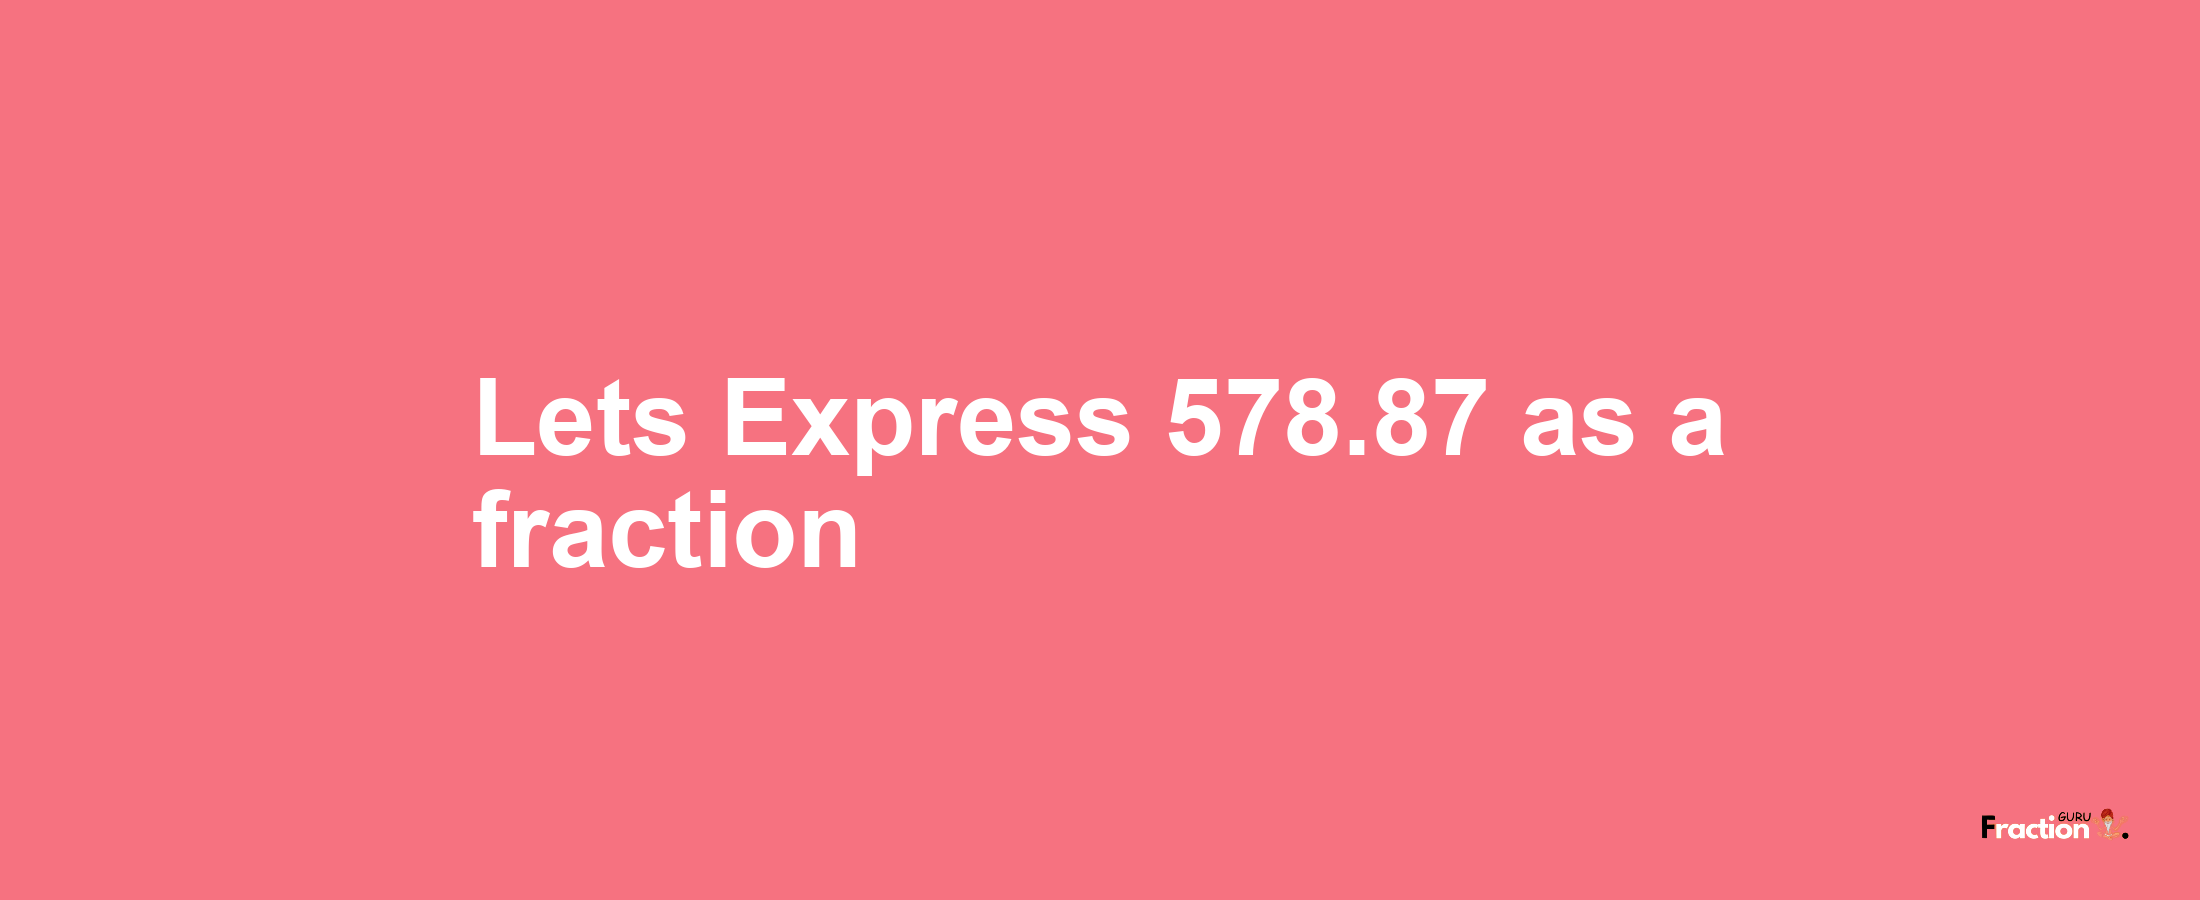 Lets Express 578.87 as afraction